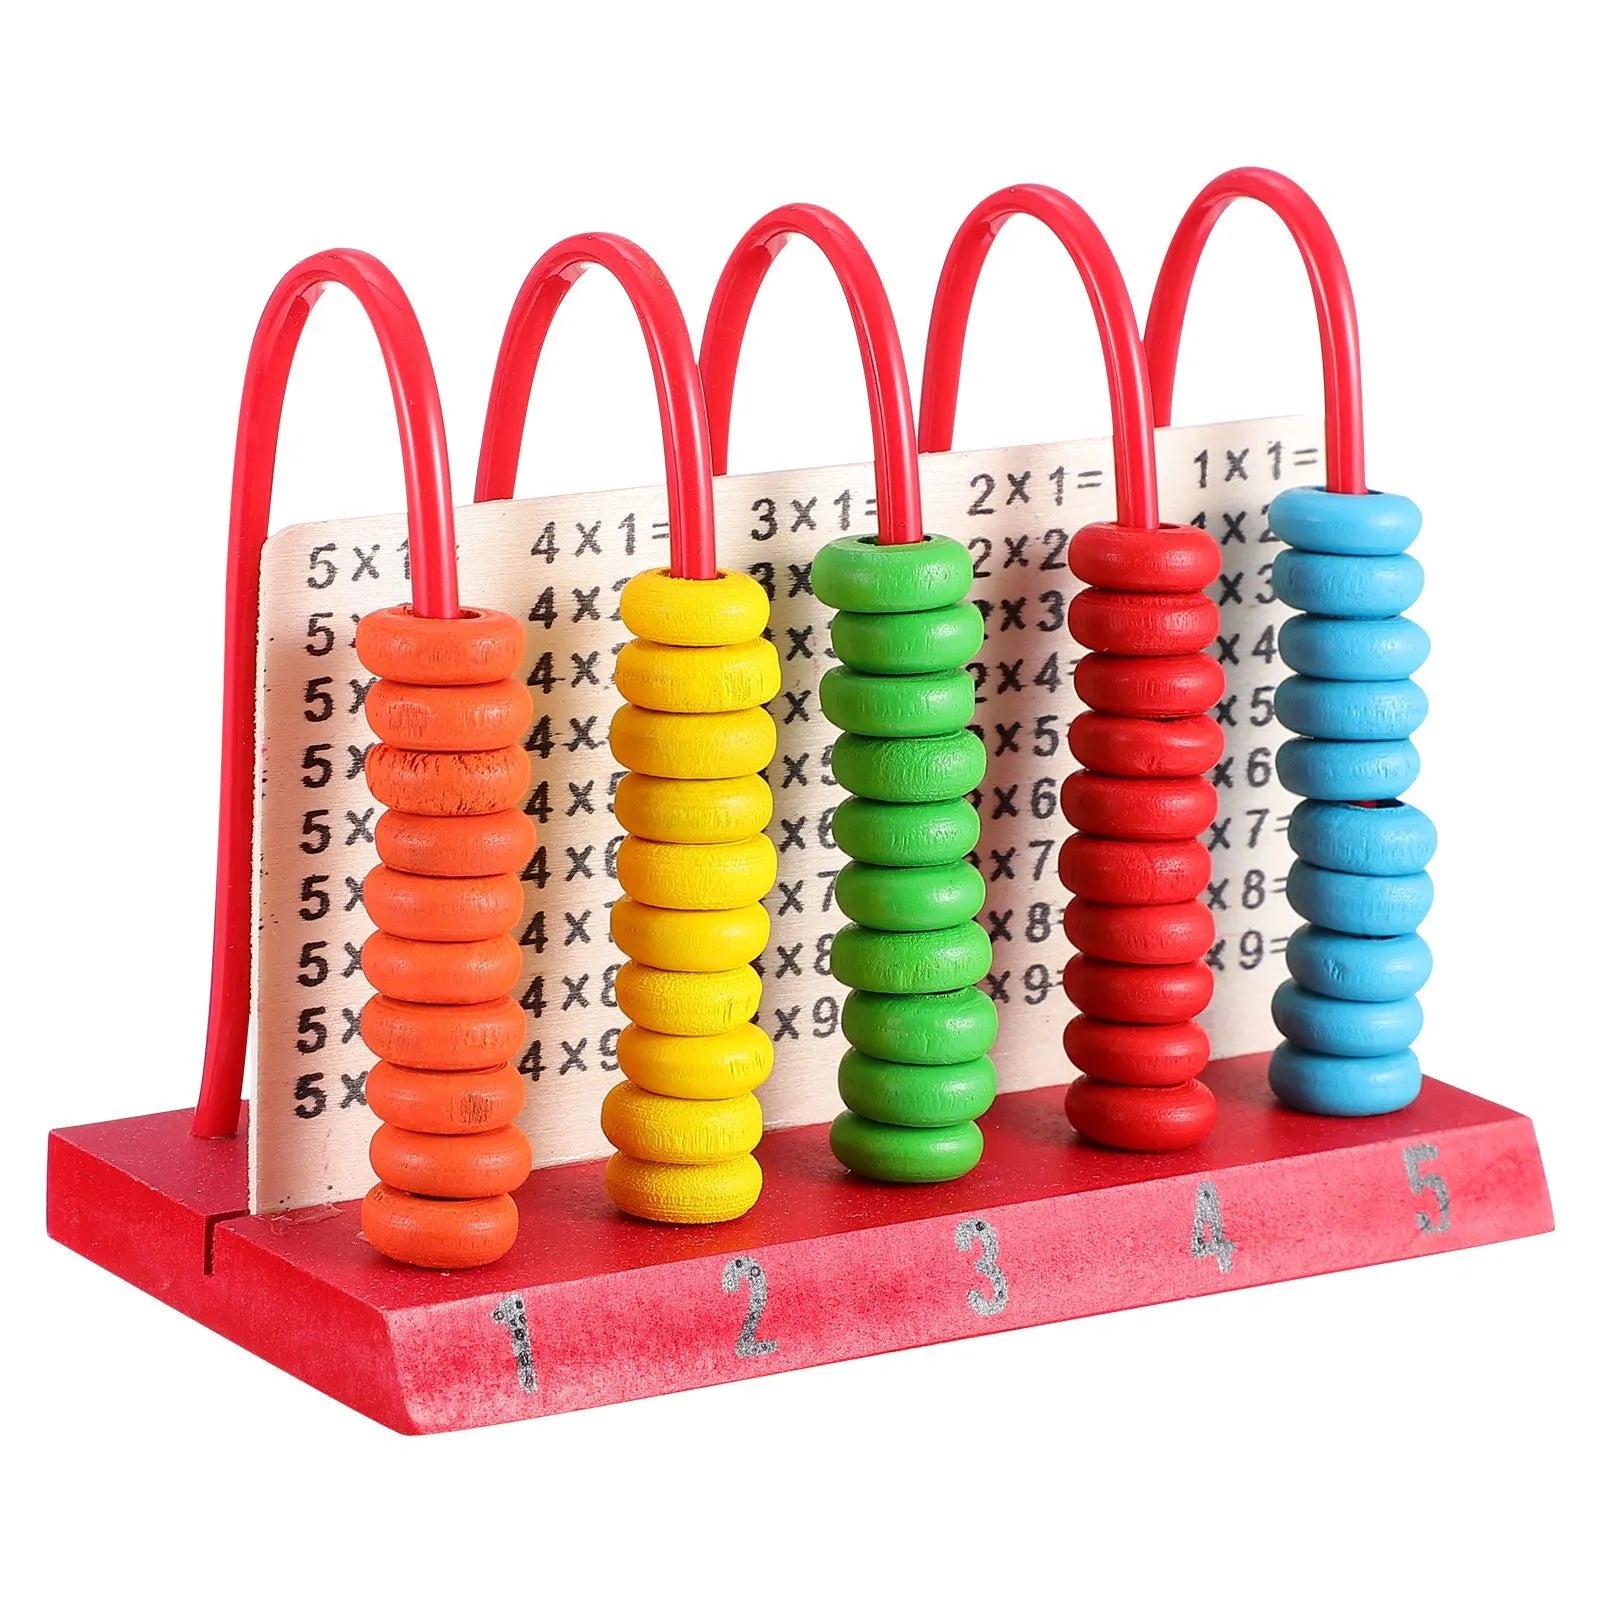 Colorful Wooden Abacus Toy for Children - Enhancing Math Skills and Numeracy - ToylandEU